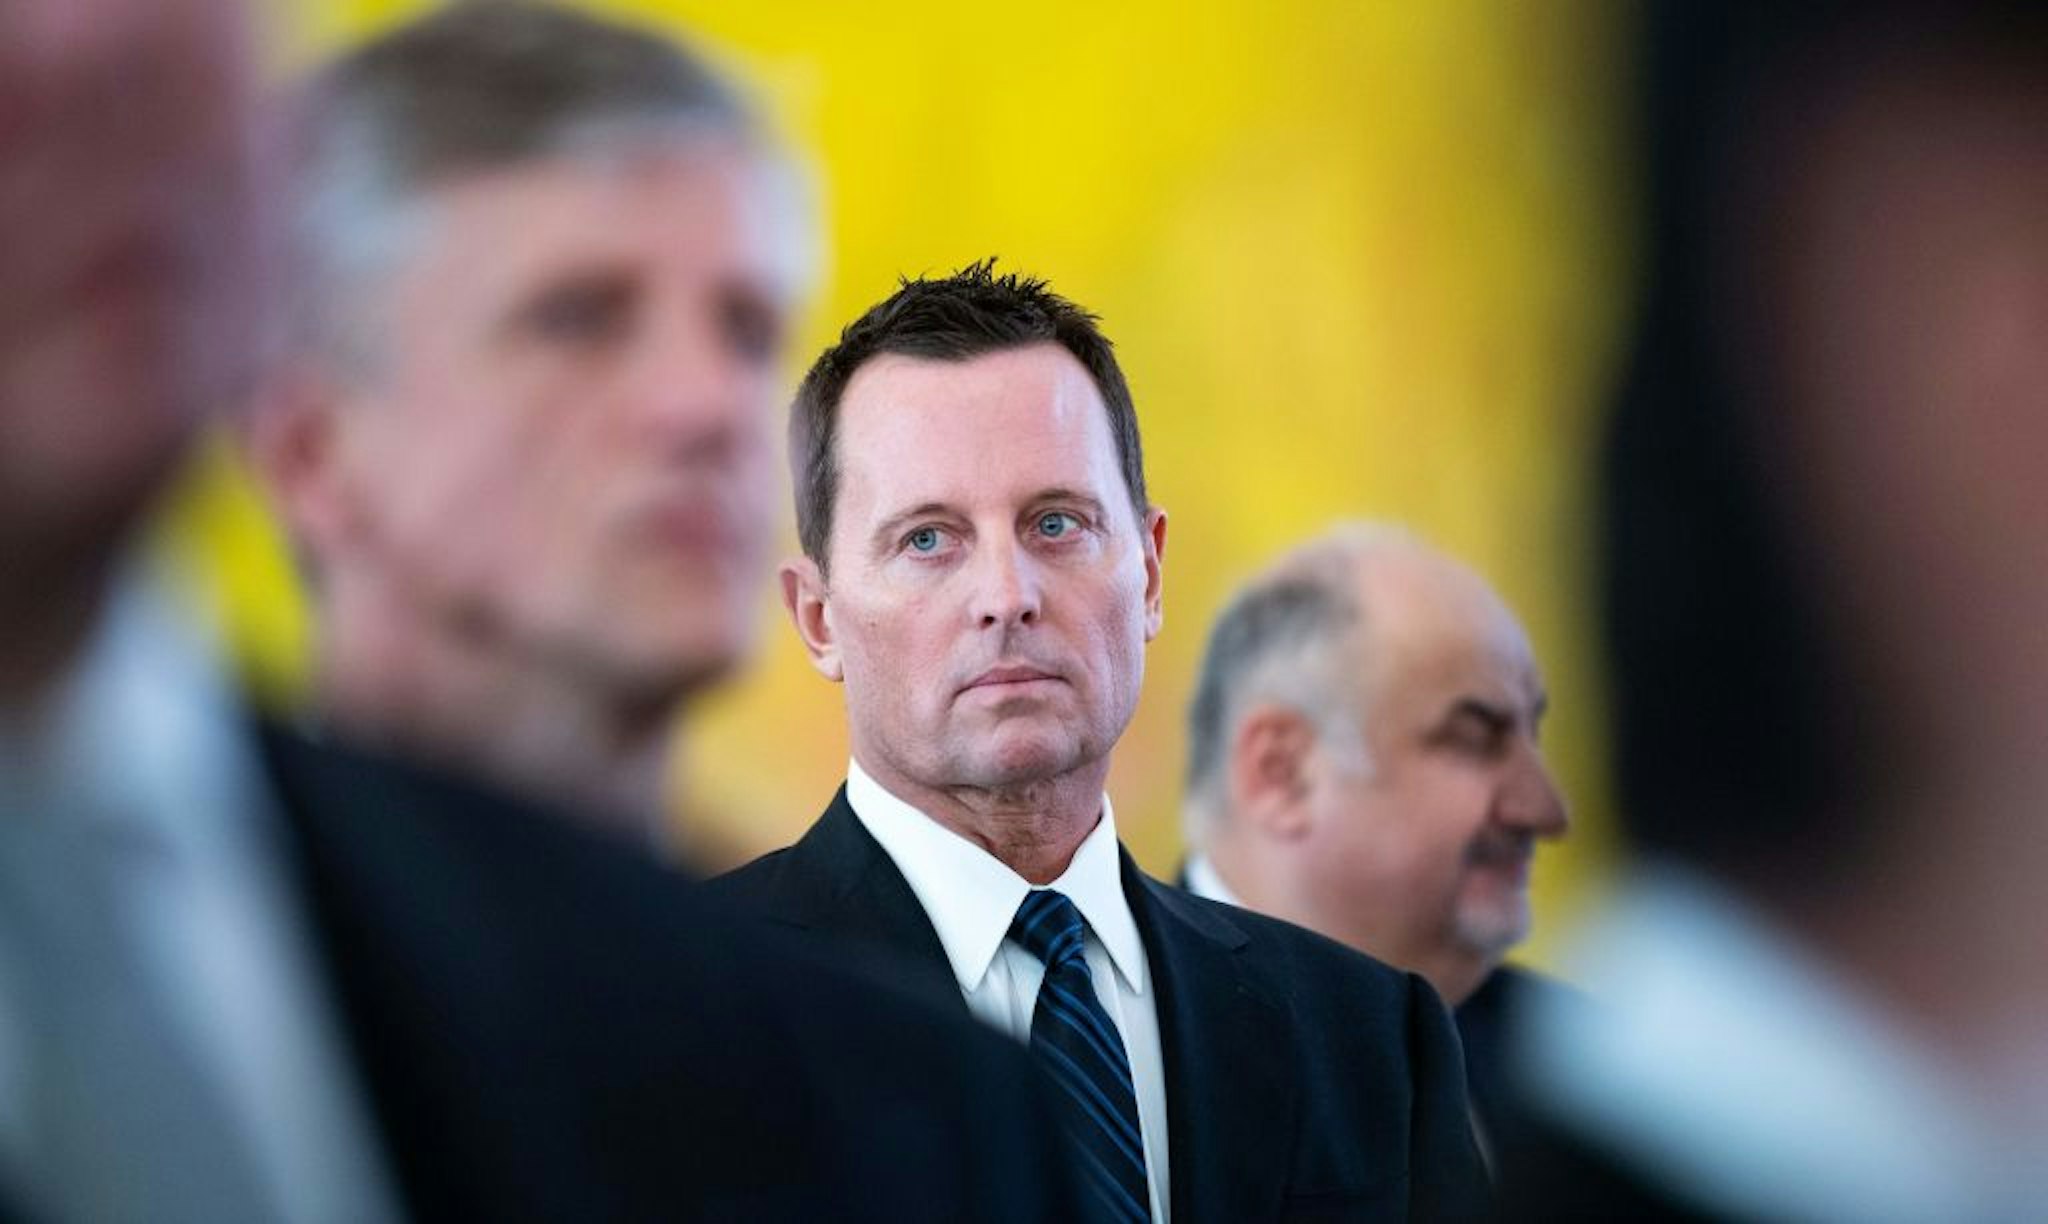 US ambassador to Germany Richard Grenell attends a new year's reception